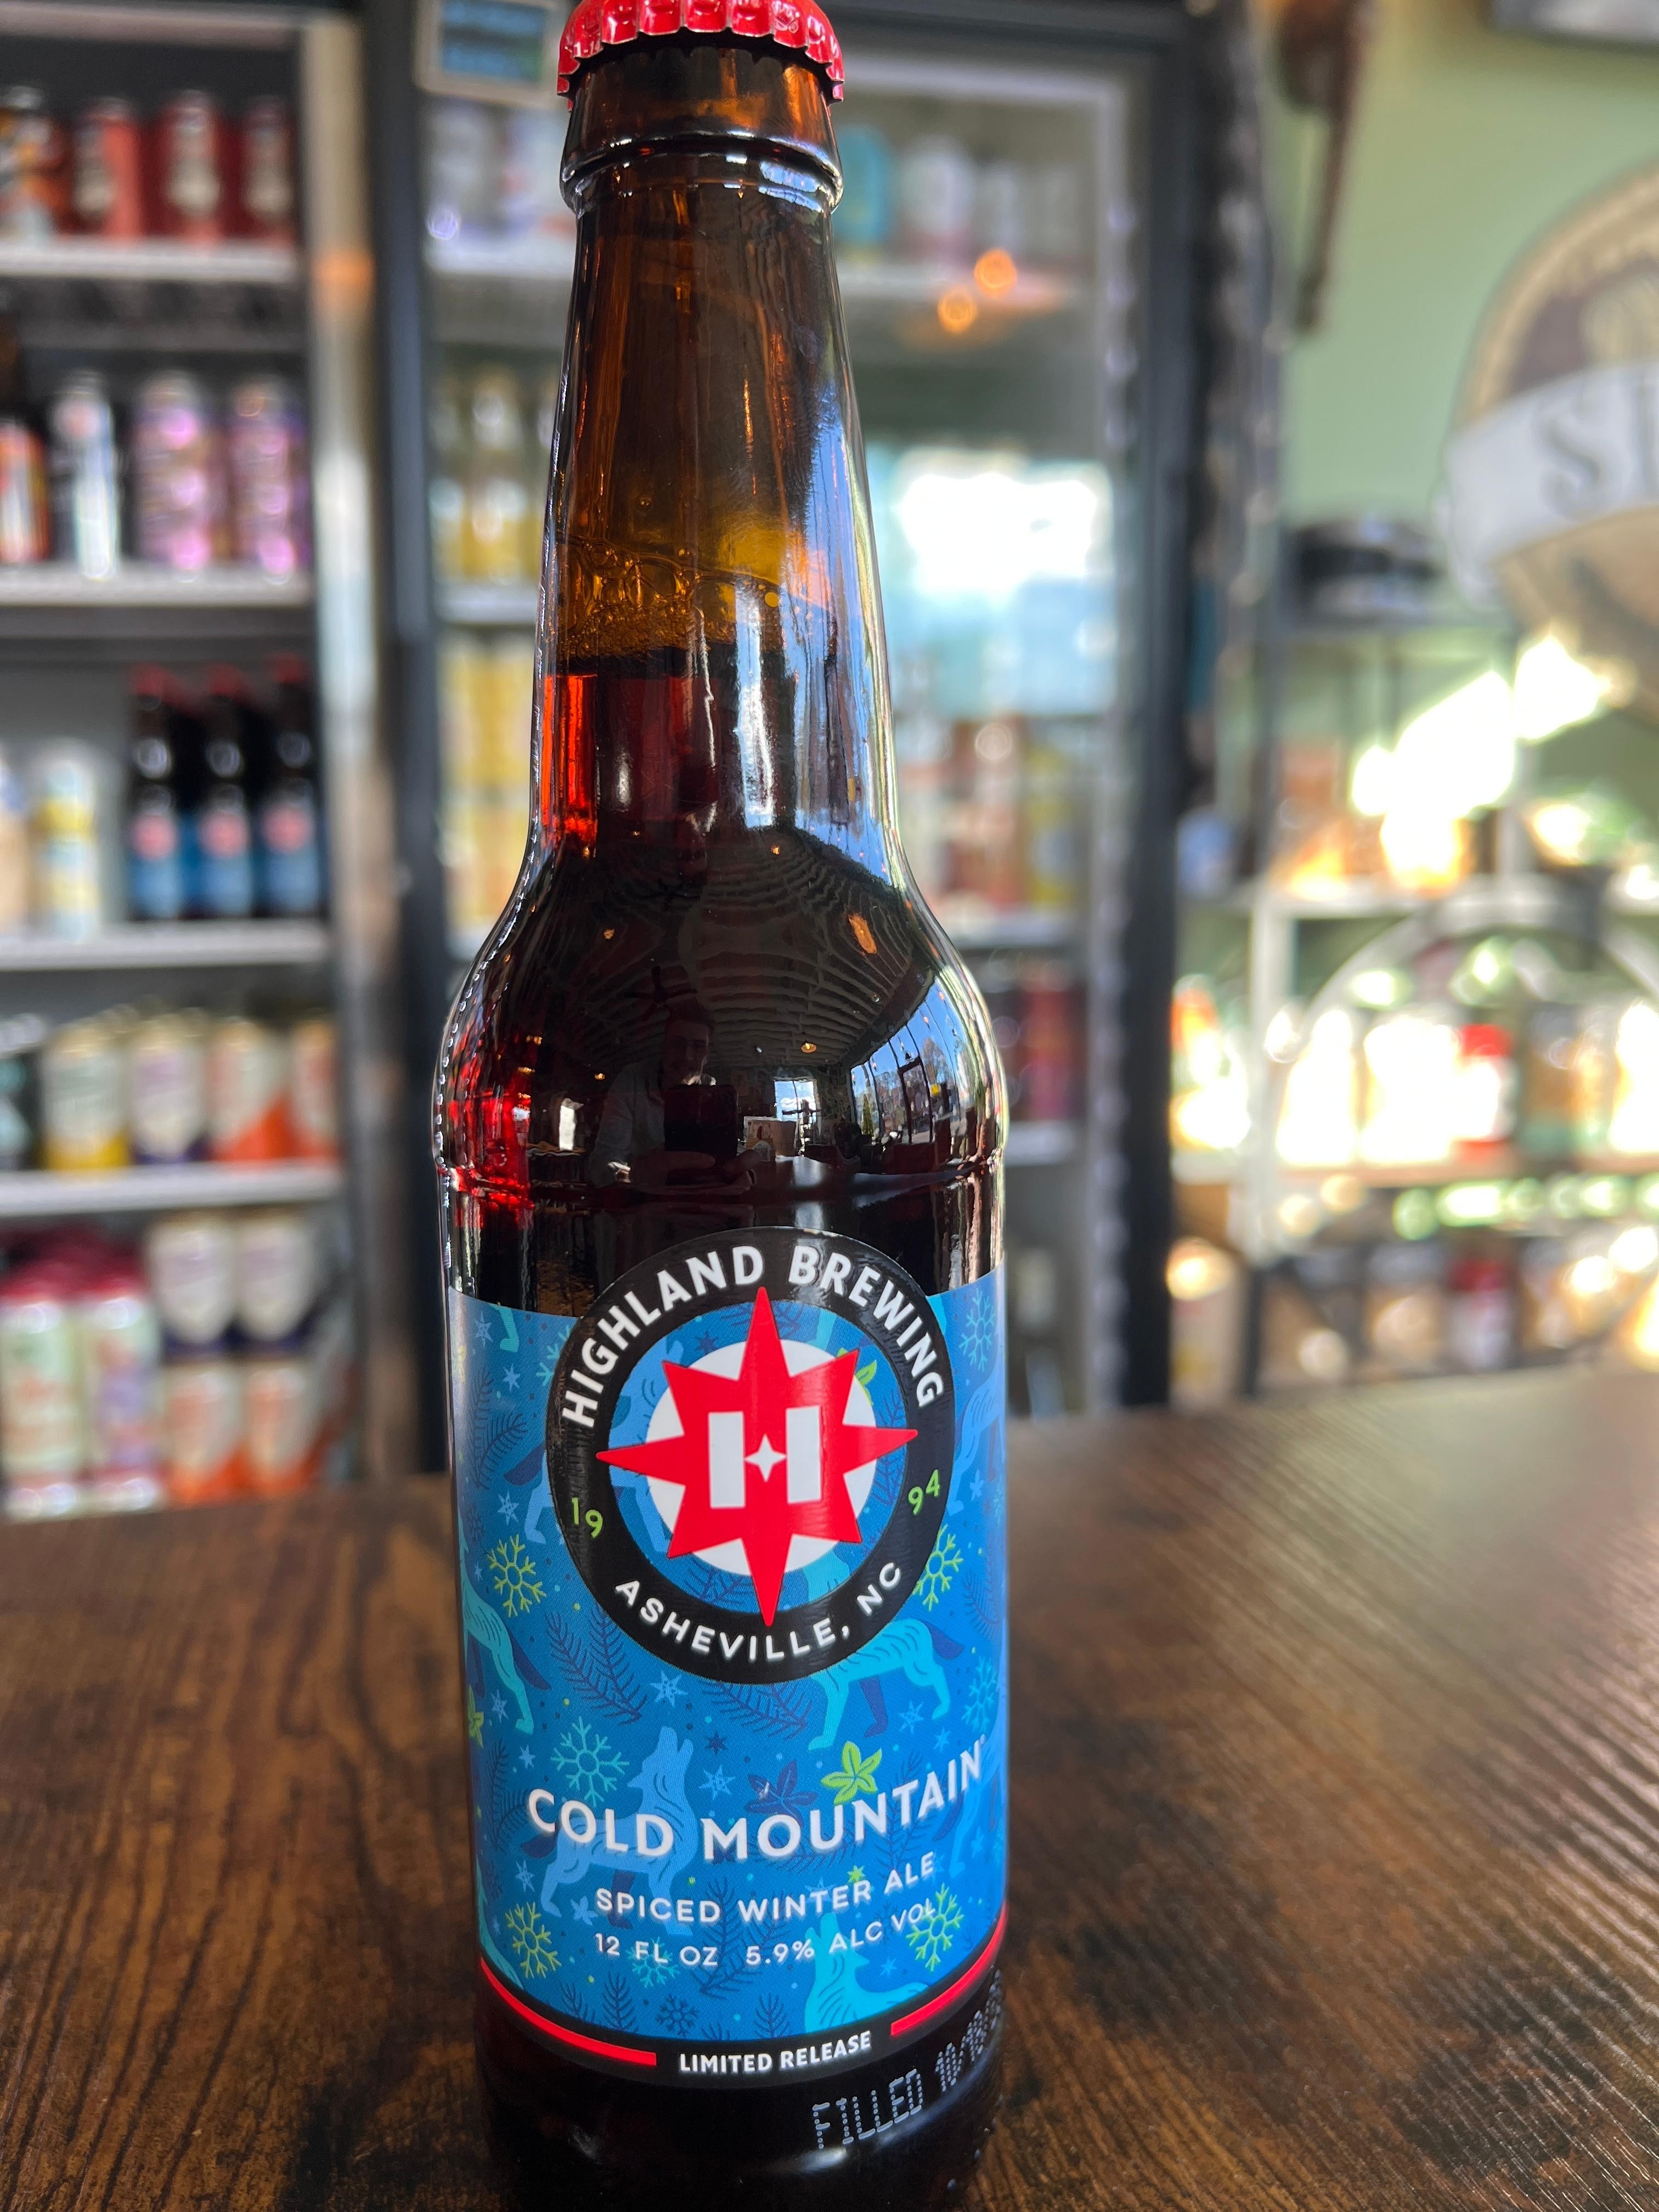 Cold Mountain - Highland Brewing